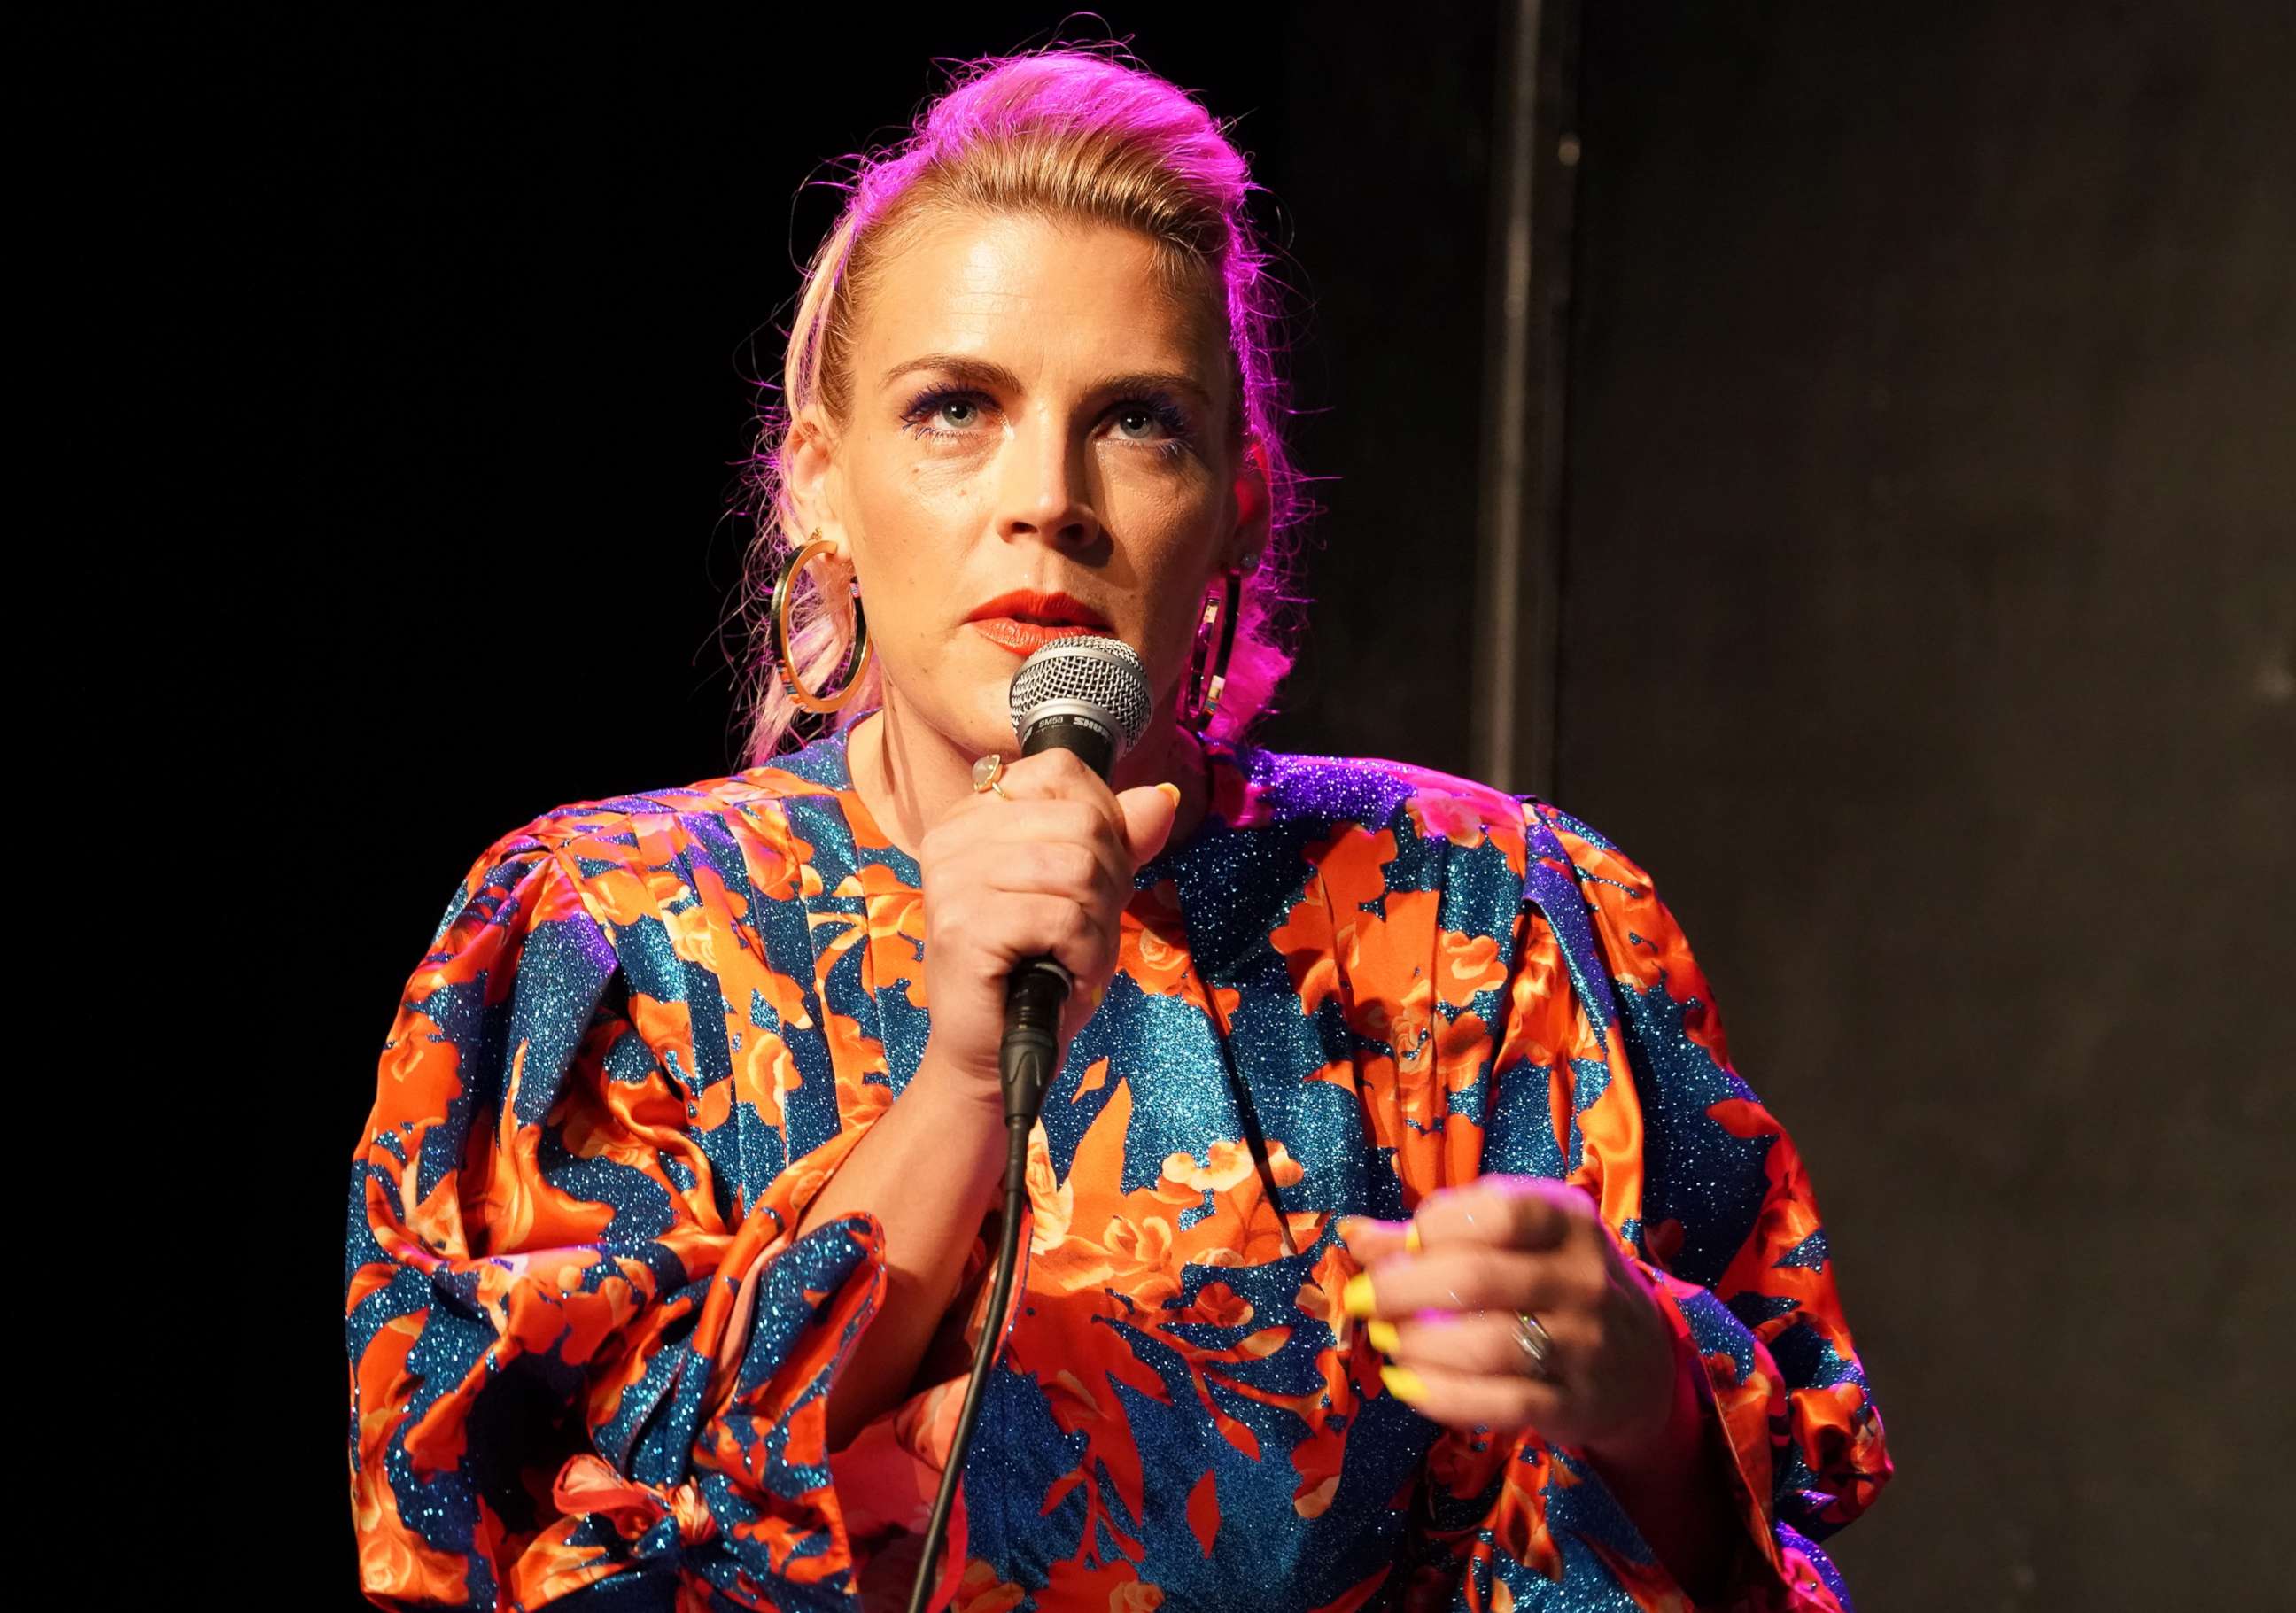 PHOTO: Busy Philipps moderates a panel at UCB Sunset Theater on May 29, 2019, in Los Angeles.